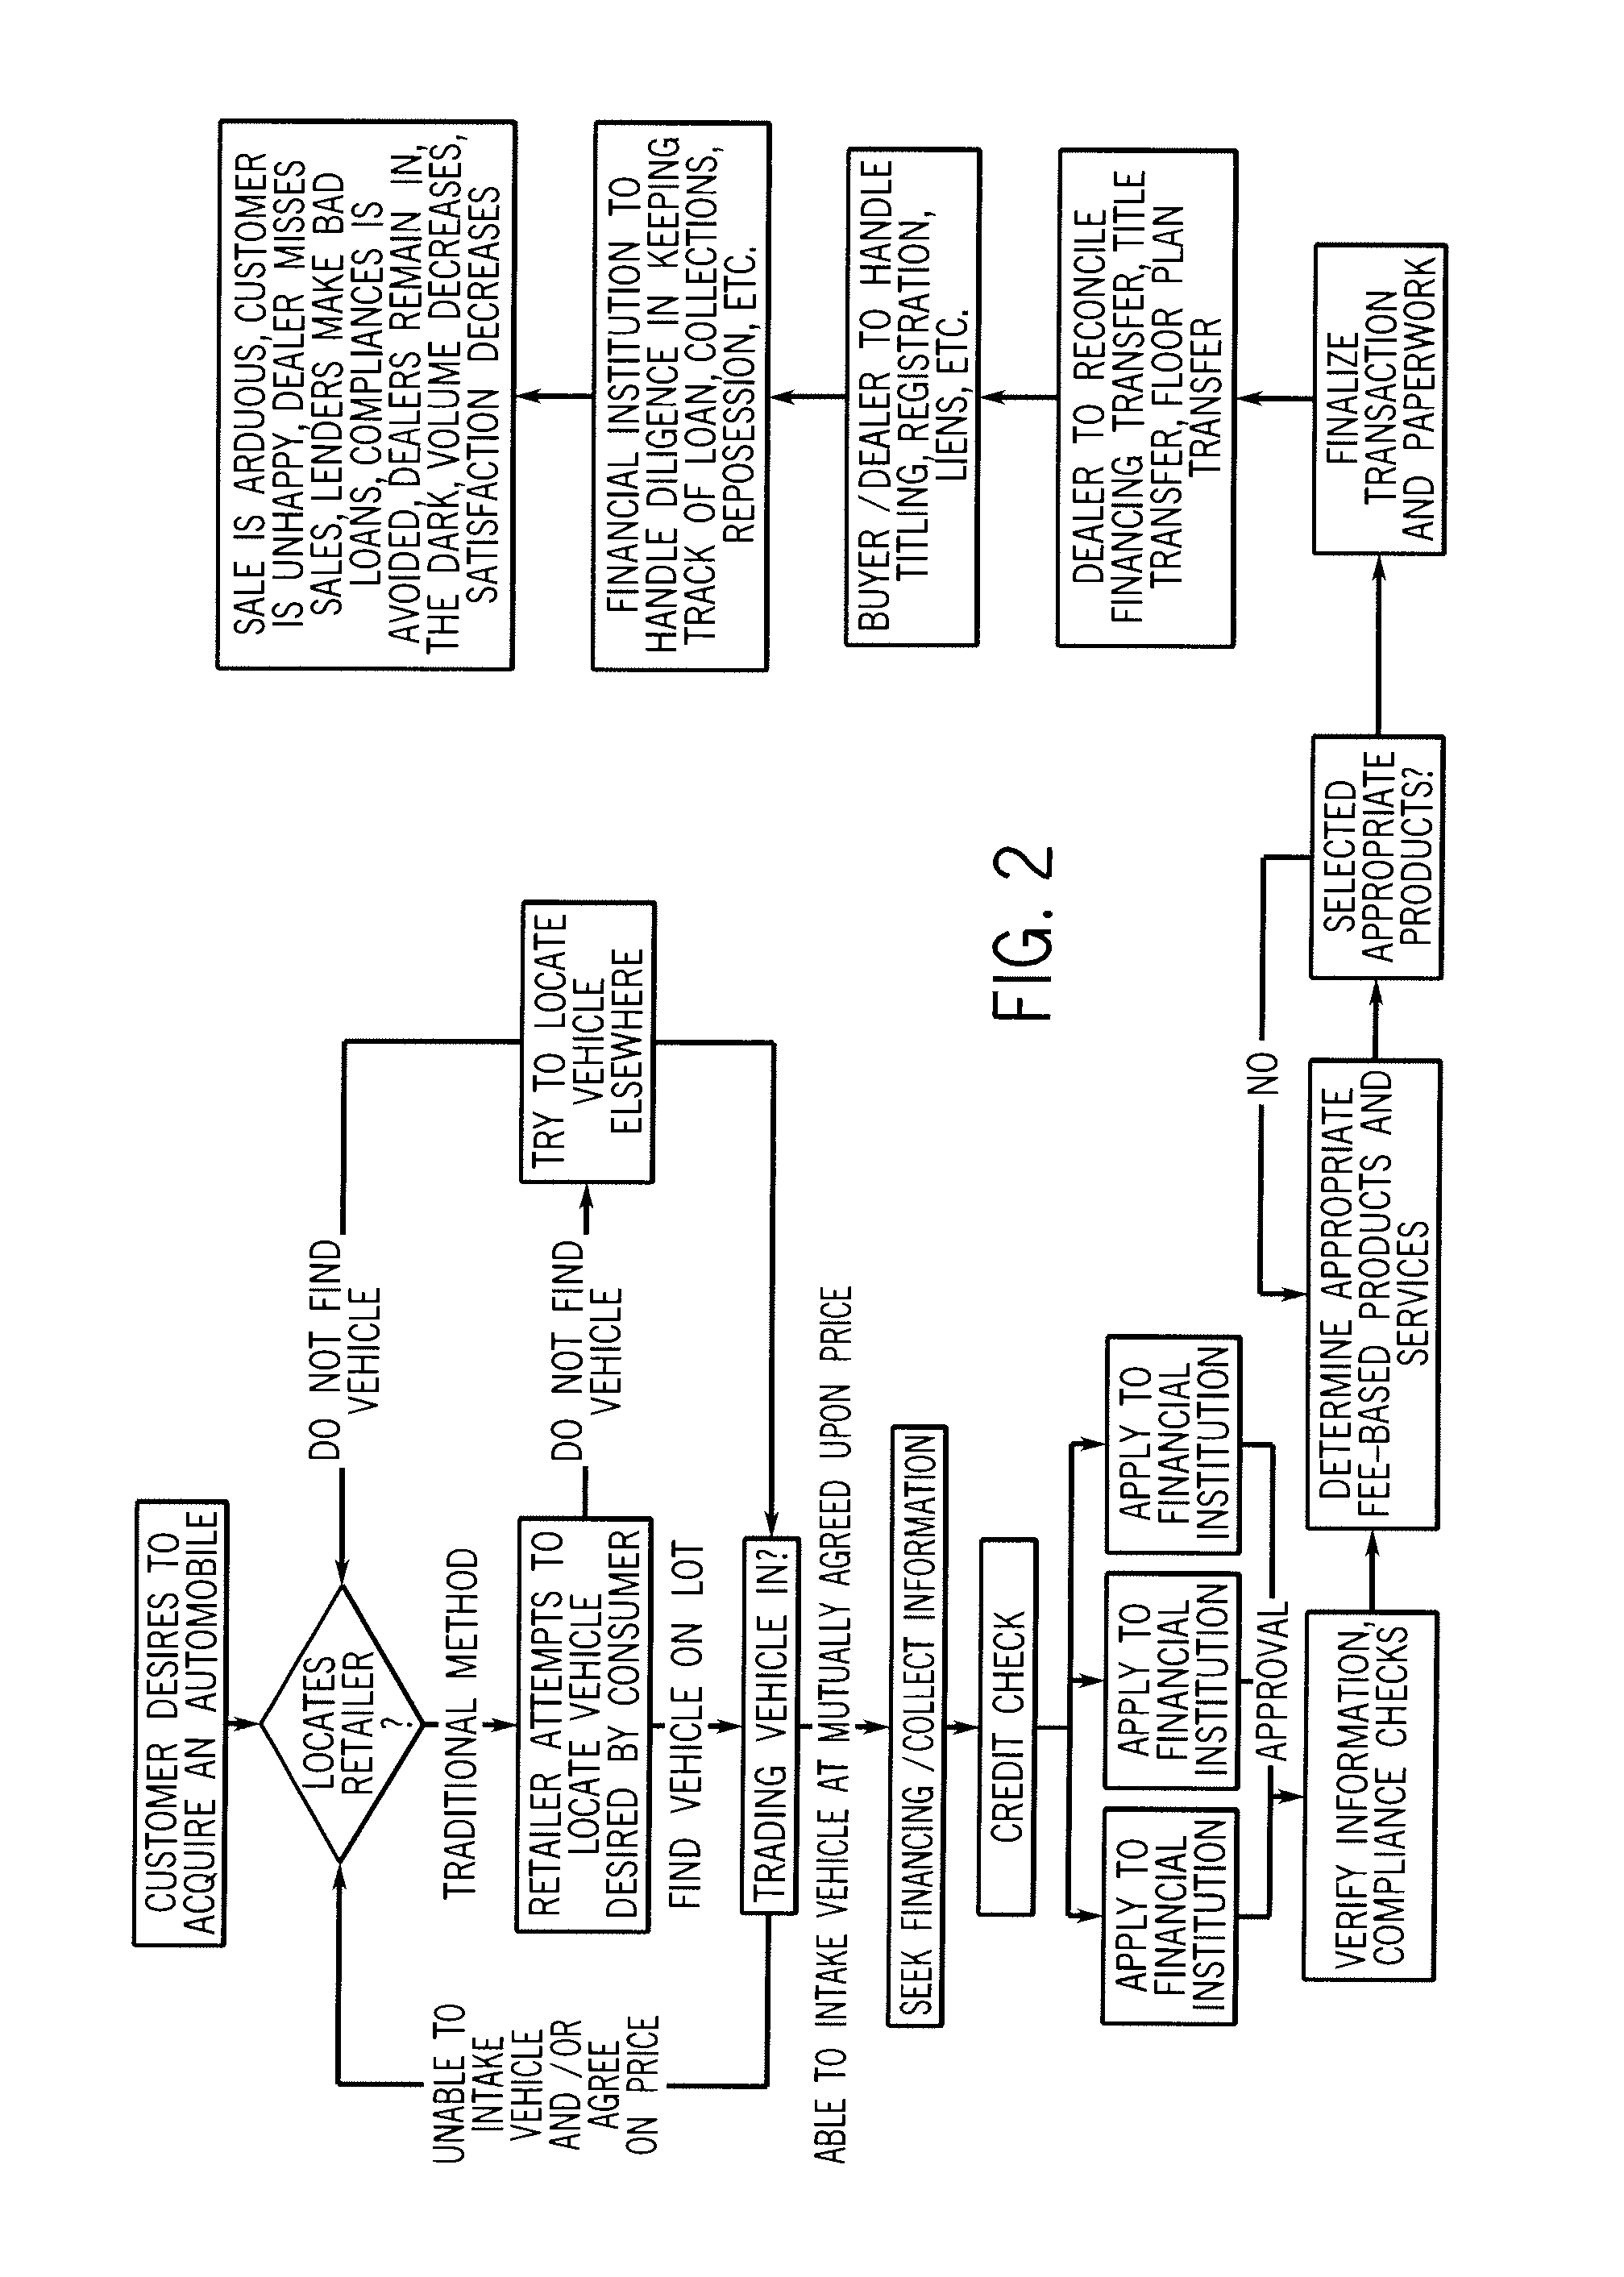 System and method for integrated credit application and tax refund estimation